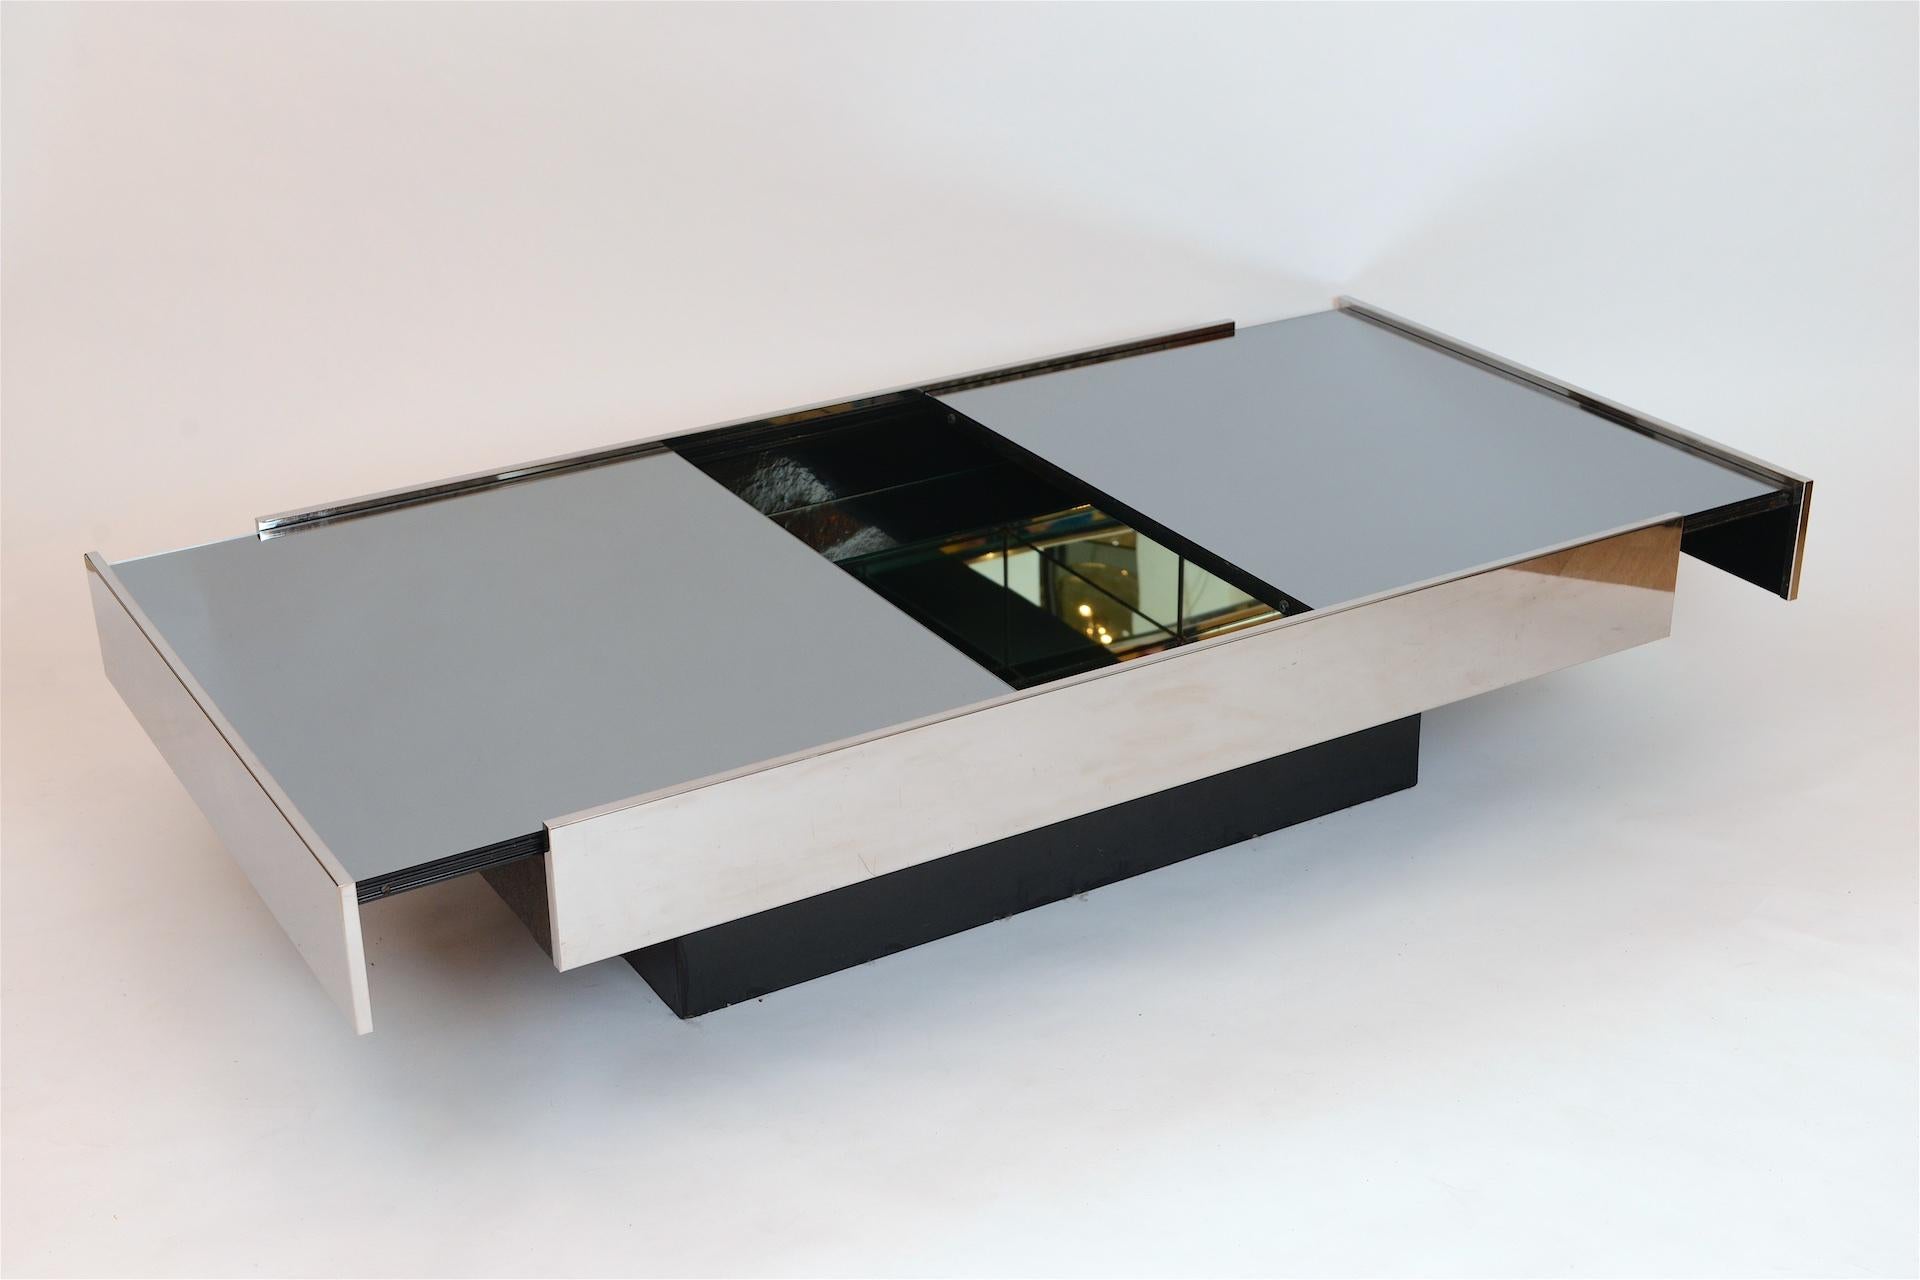 Mirrored bar / cocktail table by Willy Rizzo for Cidue. 

Grey mirrored top slides back to reveal a hidden mirrored interior. 

Closed measures 130cm open 200cm

In great condition

